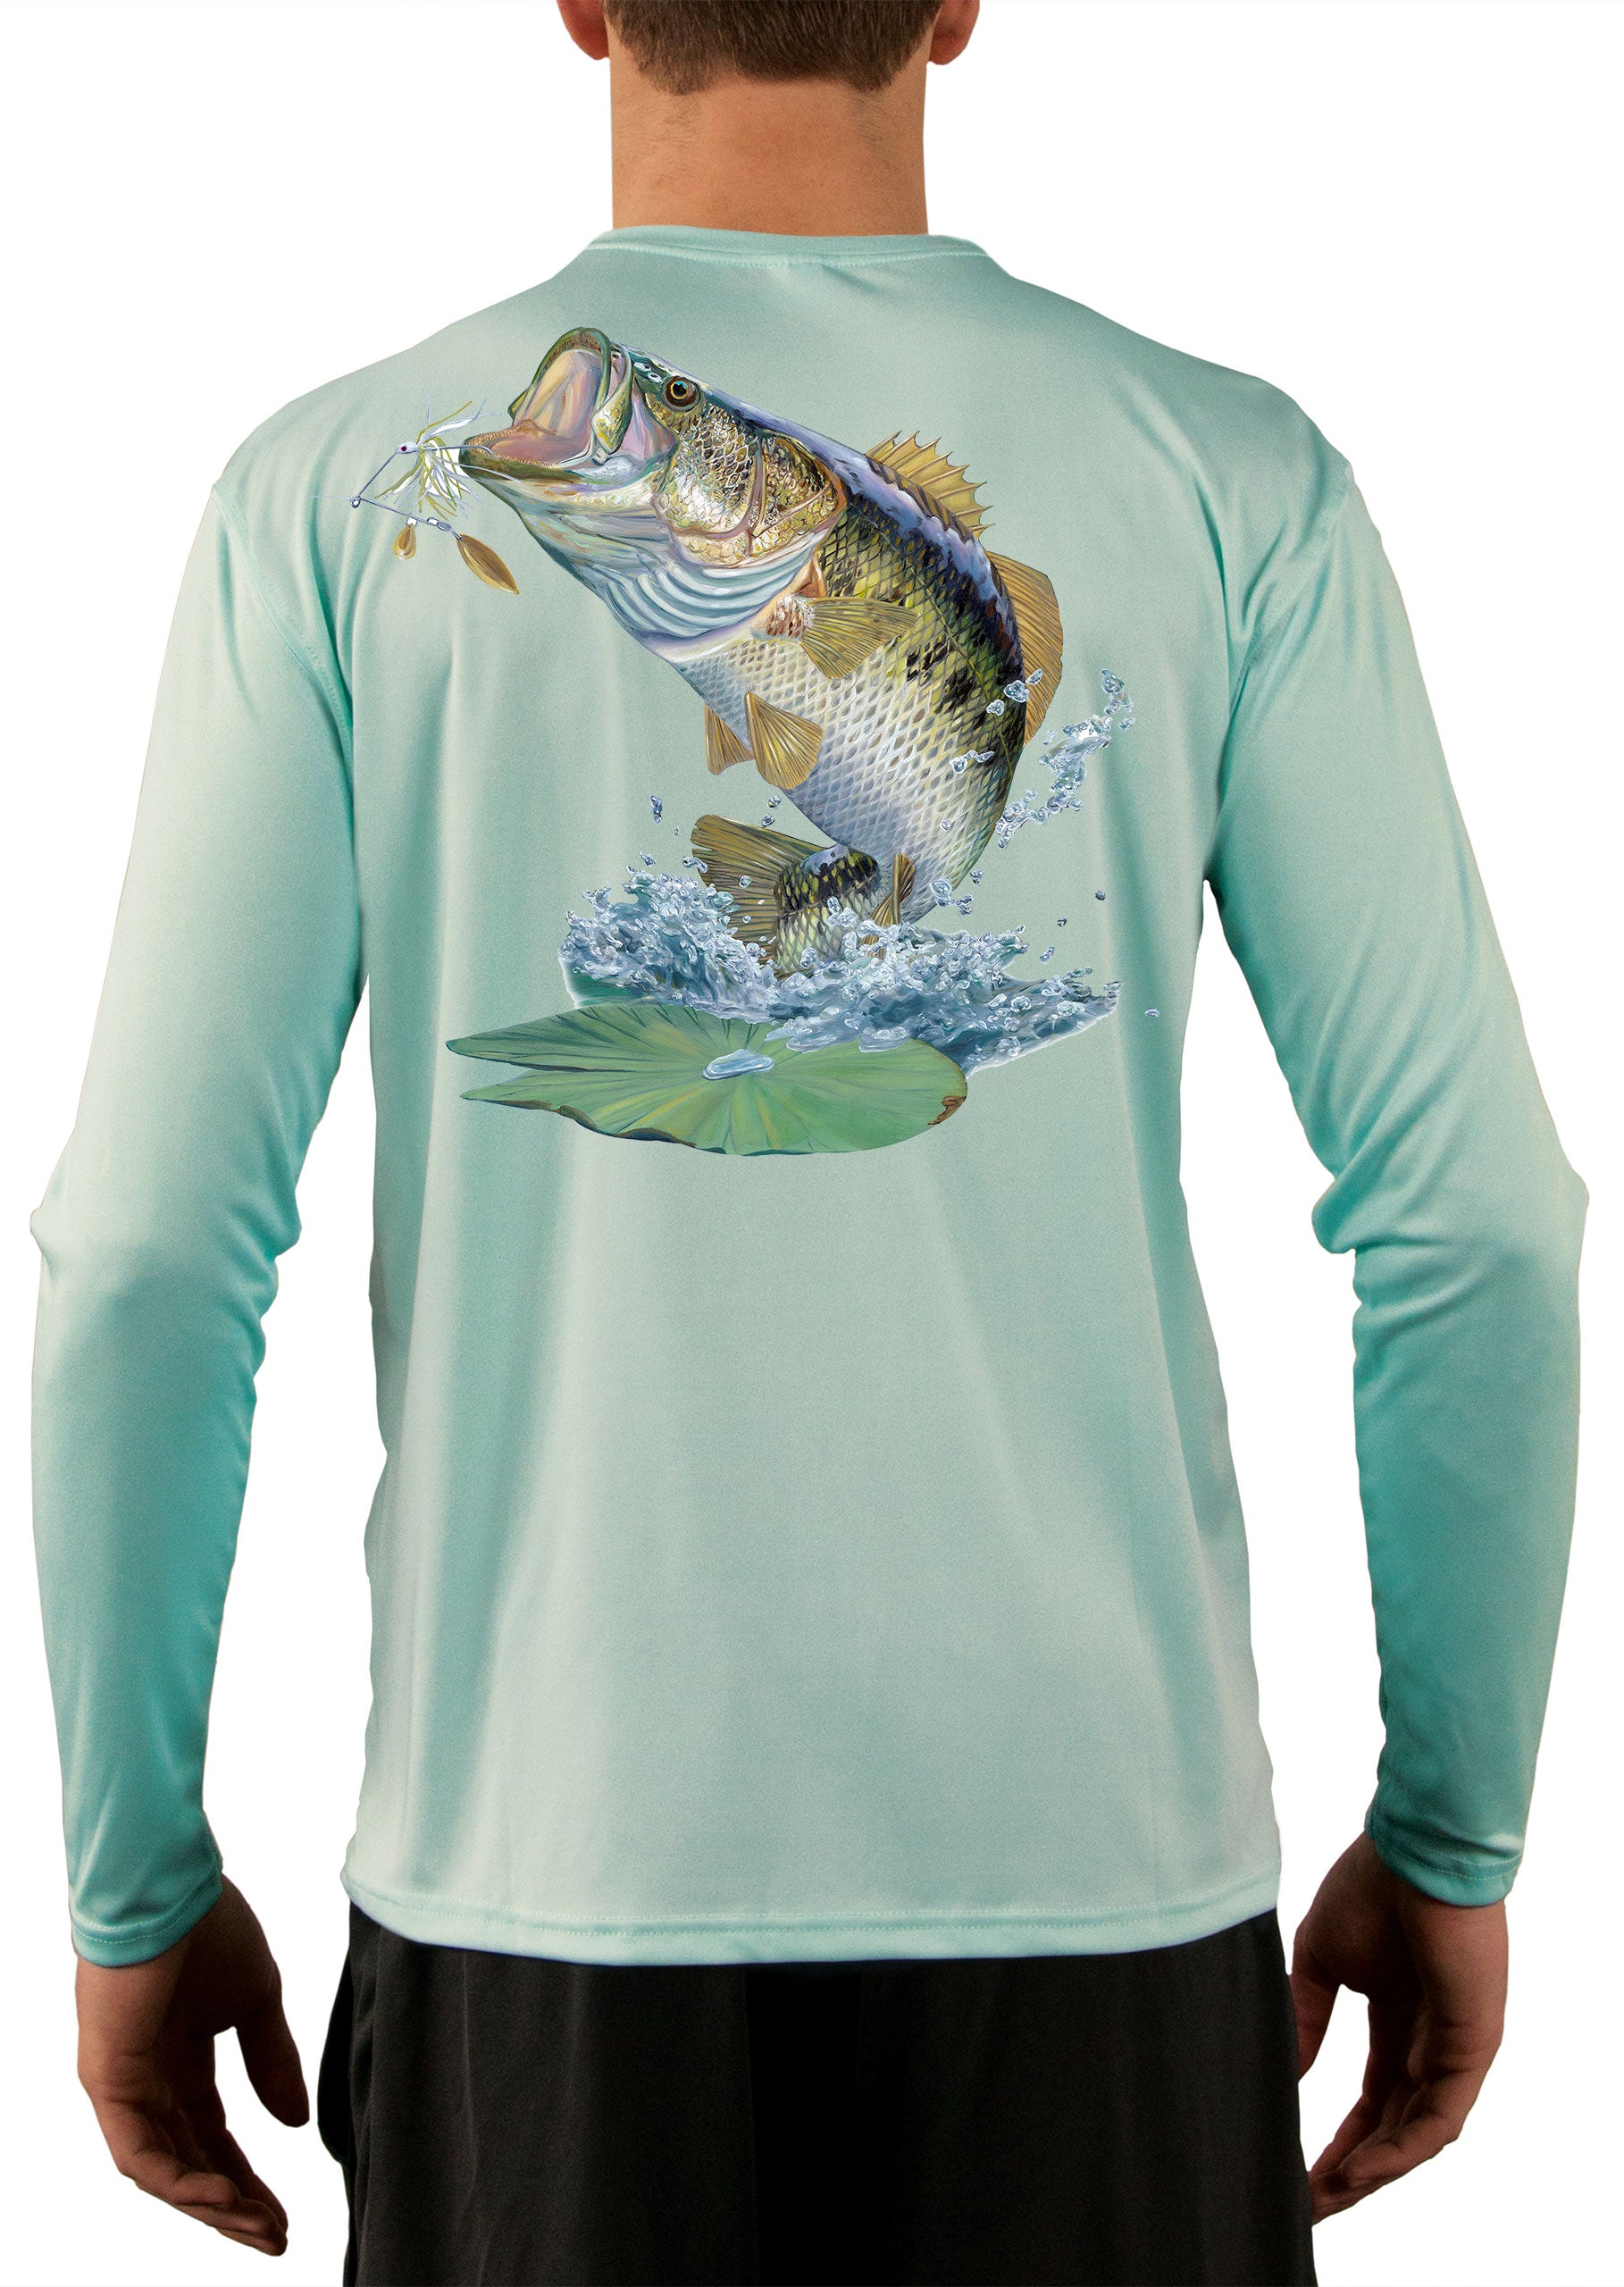 Large Mouth Bass Men's Fishing Shirts - Long Sleeve, Moisture Wicking, Non-fade Print, 50+ UPF Fabric UV Protection White / Large